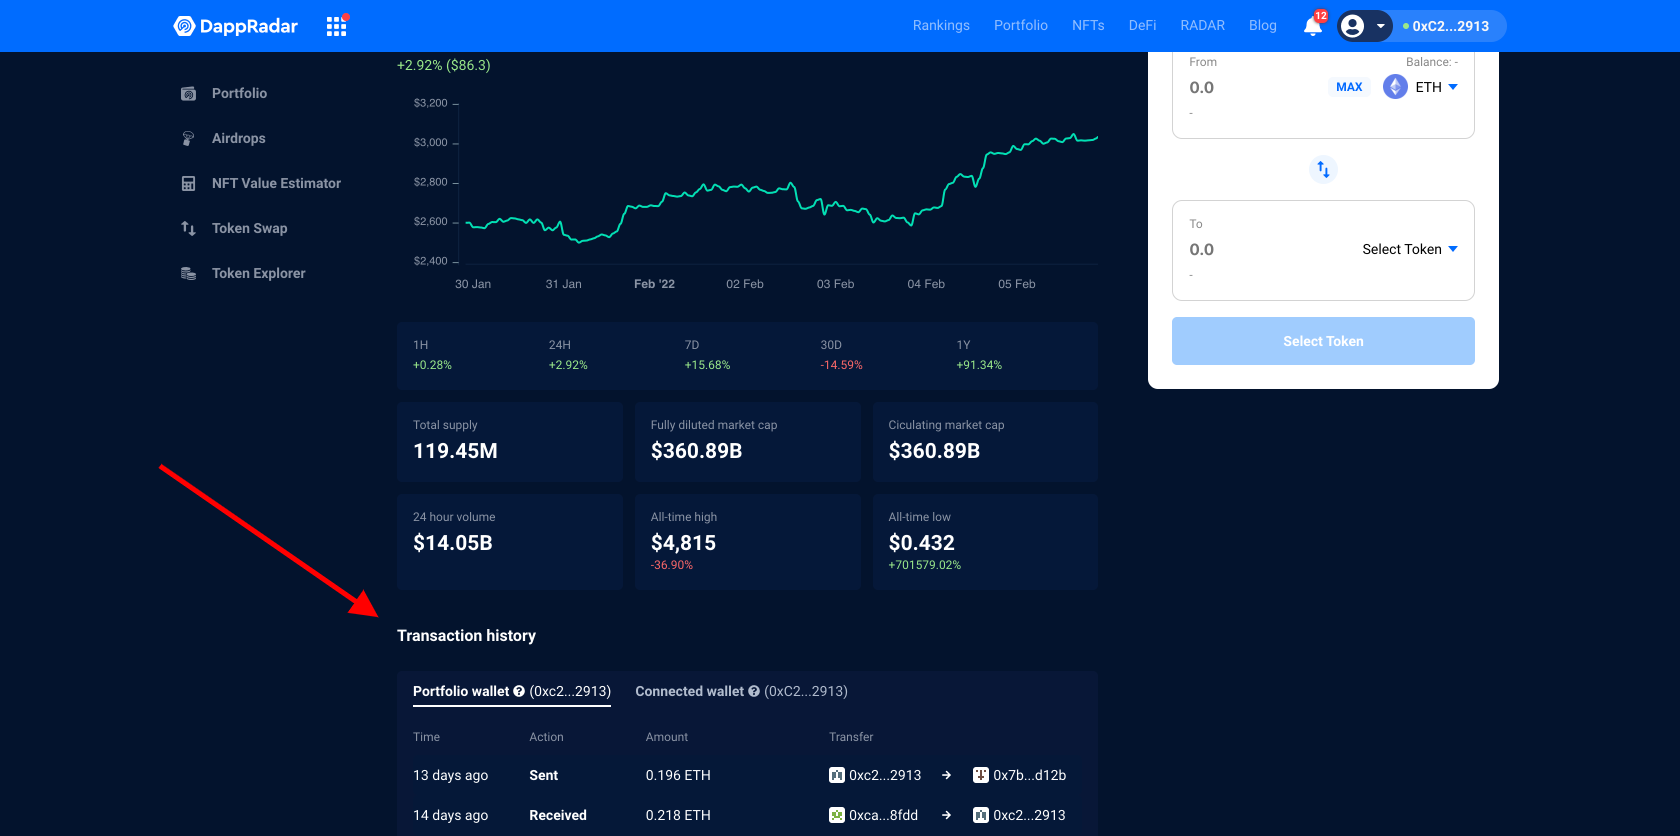 DappRadar now can show transactions history for a specific token